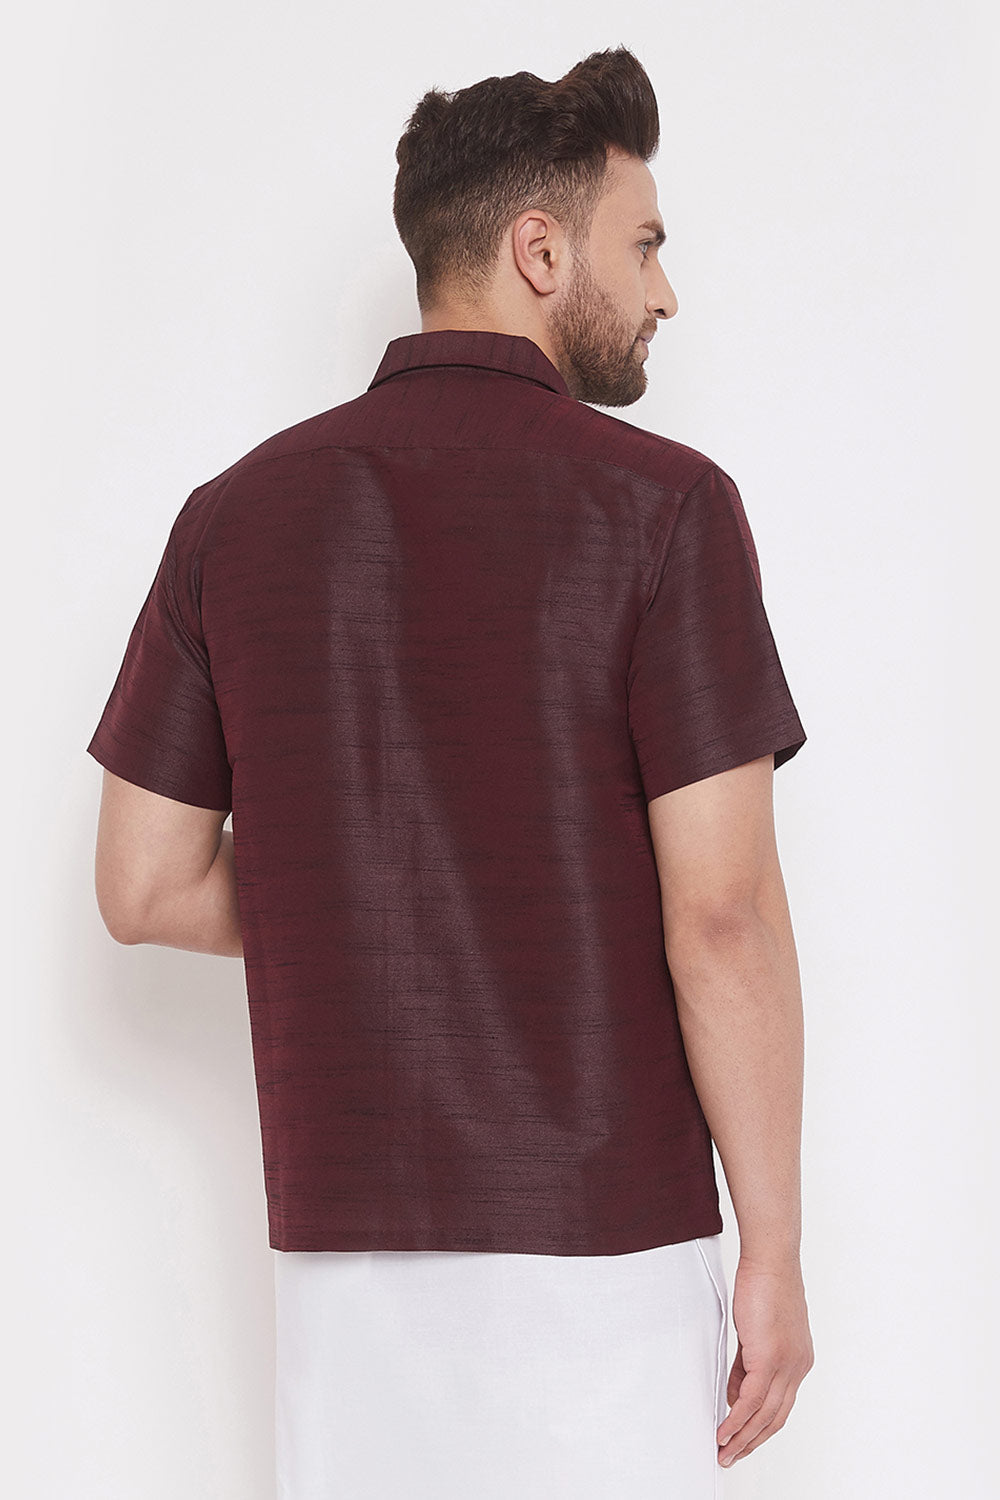 Solid Maroon Shirt for Casual Wear